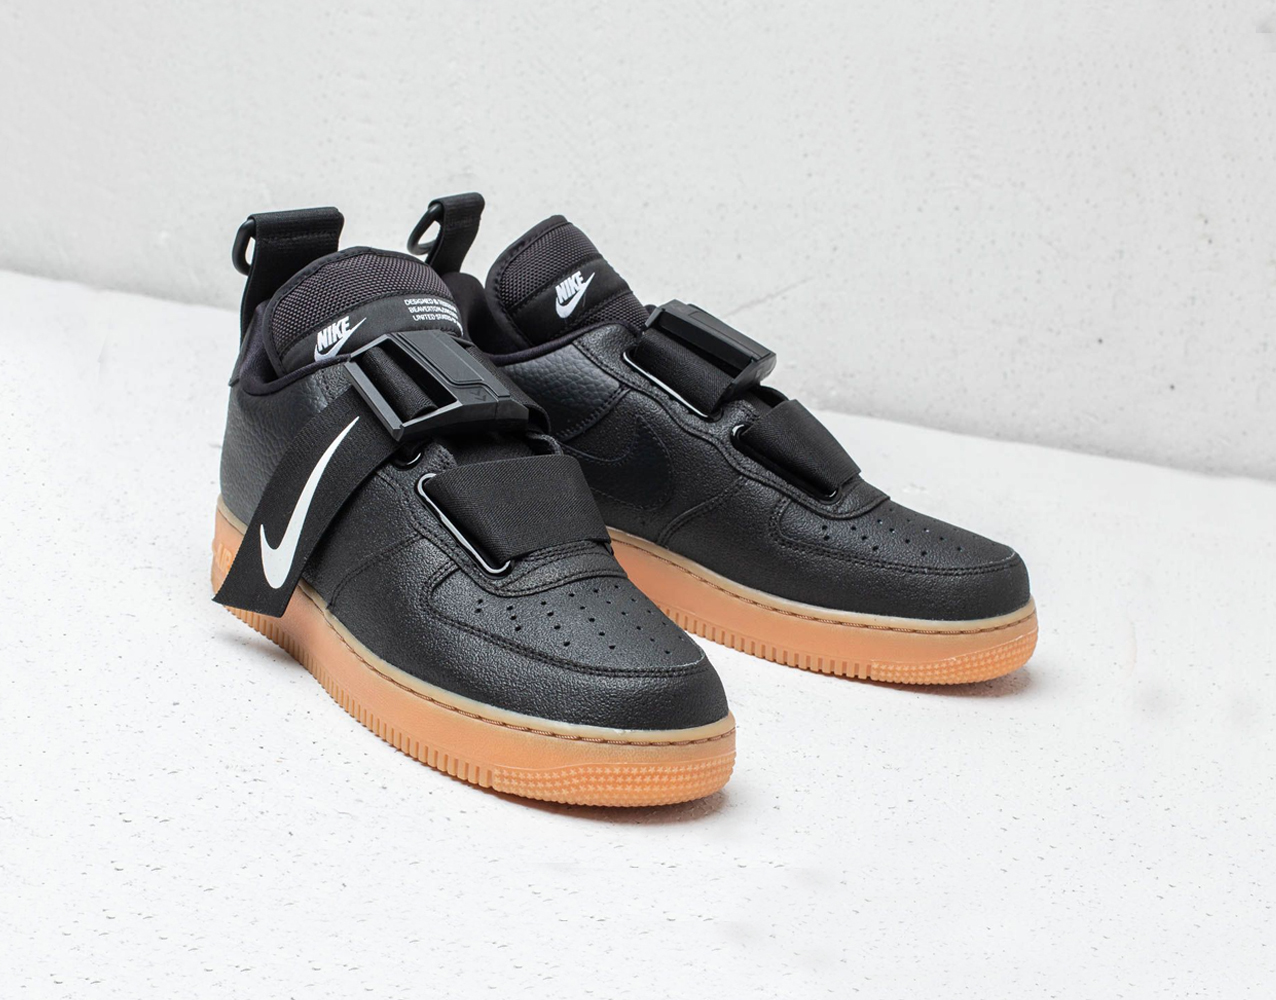 Nike Air Force 1 Utility is available 